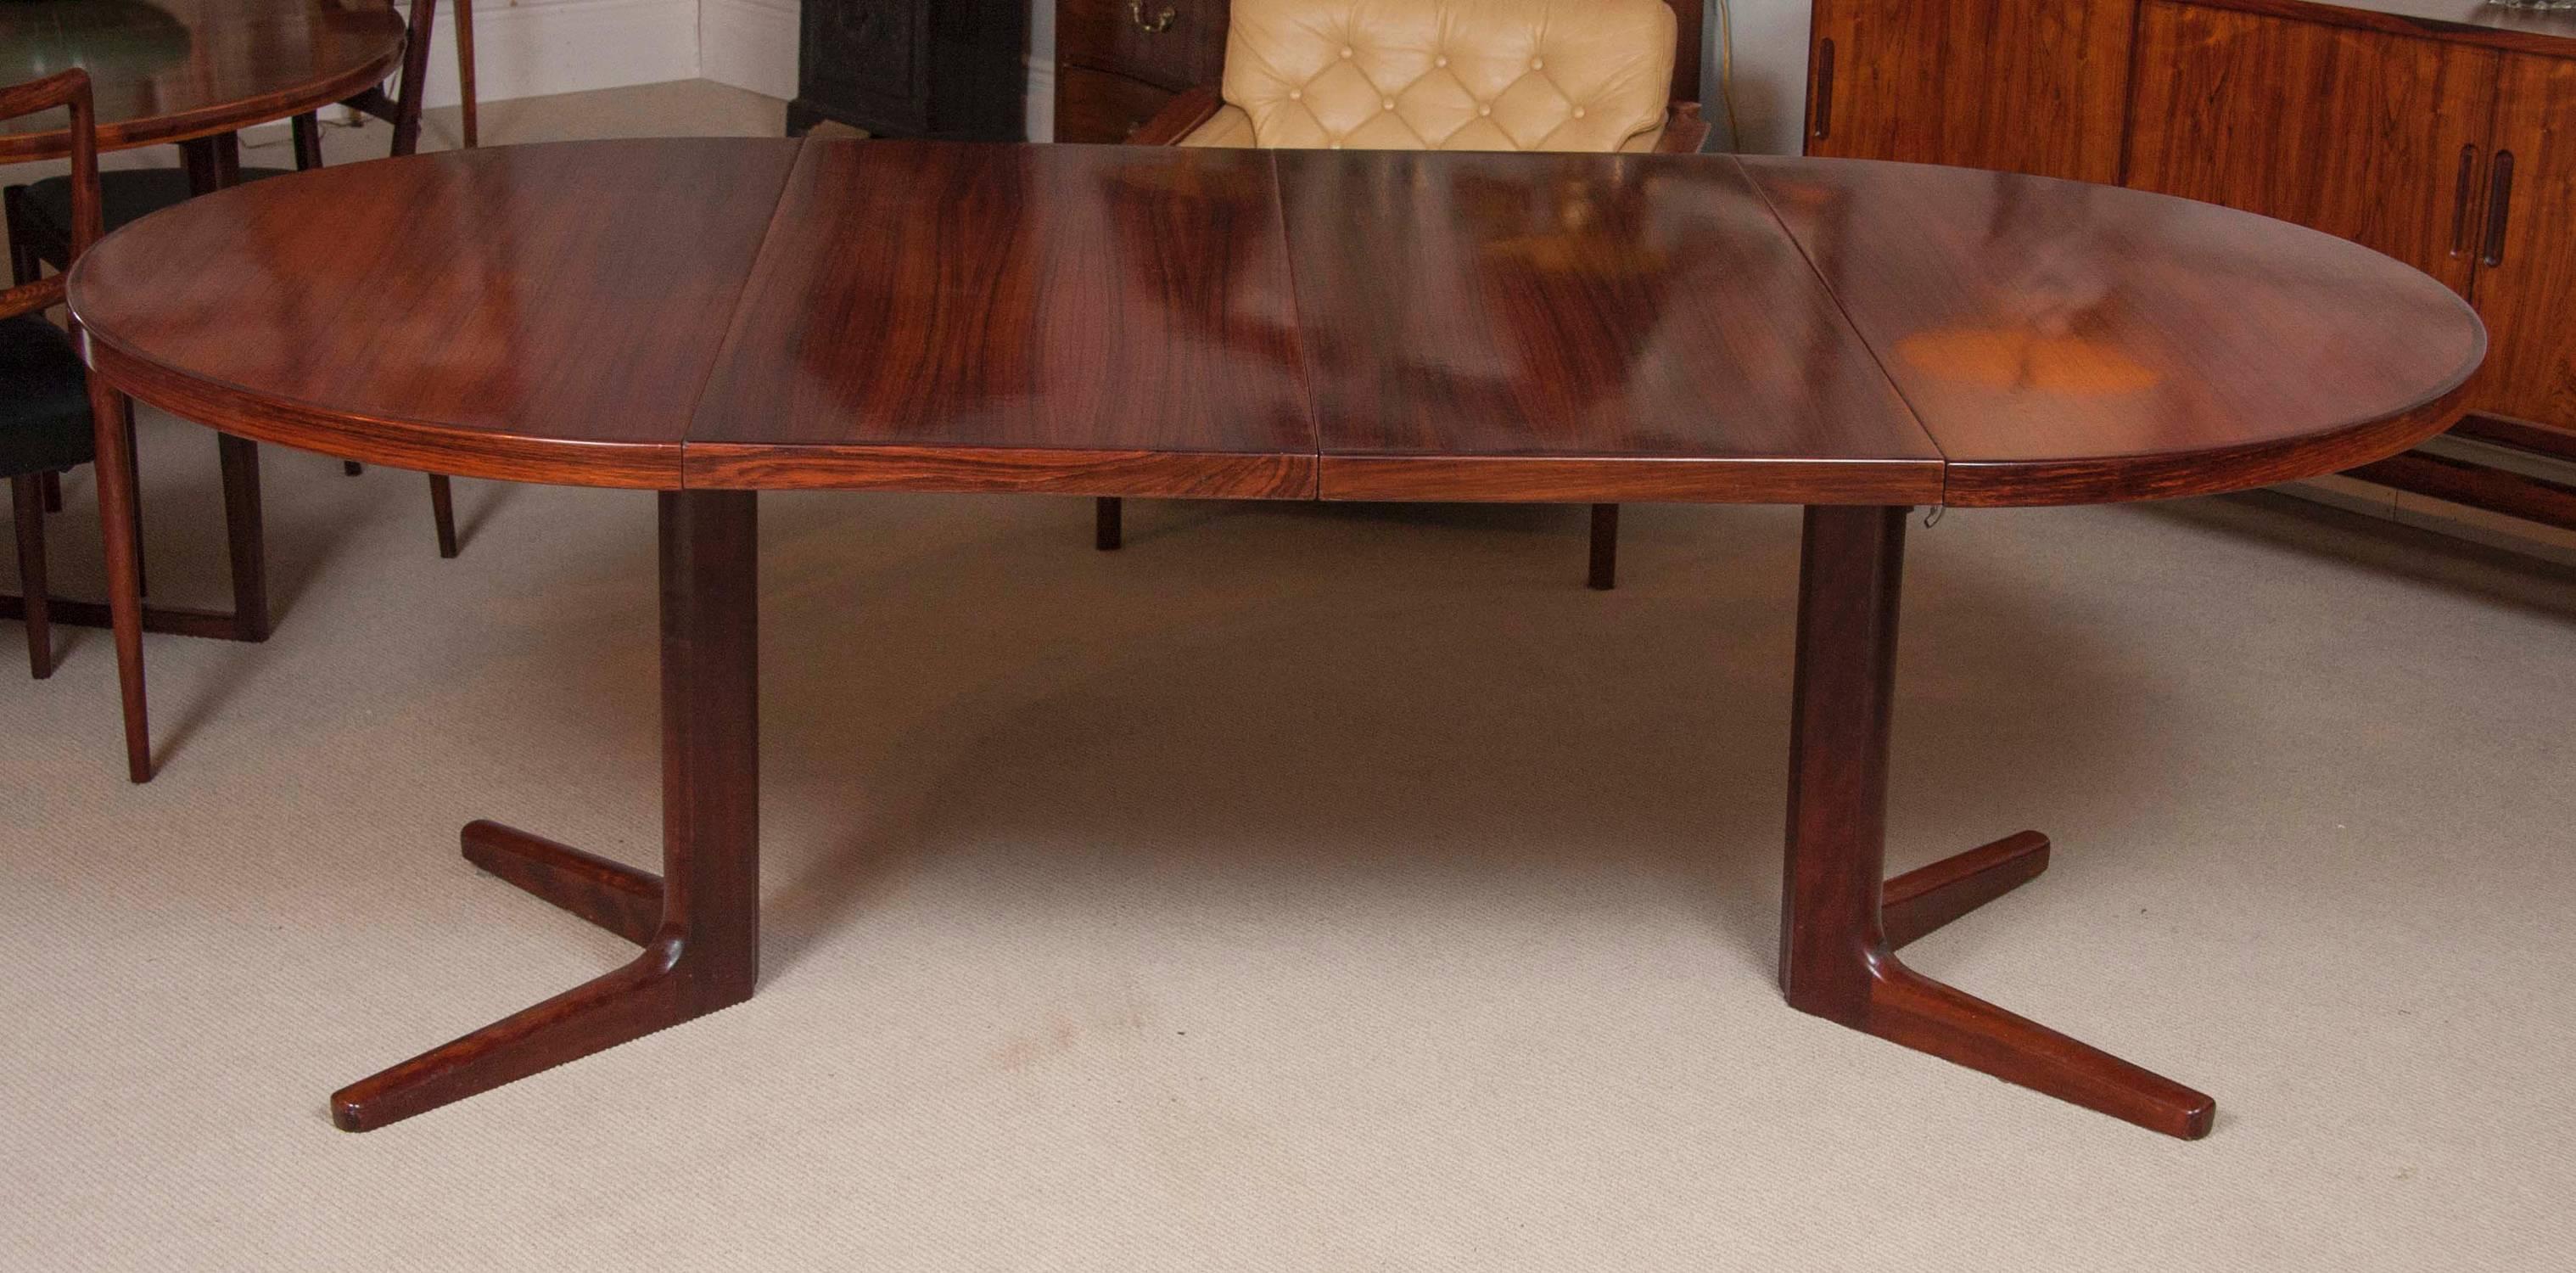 A Danish Mid-Century Modern rosewood extending dining table with two leaves. Design by Niels O. Moller. Stamped: VEJLE STOLE og MOBELFABRIK. Made in Denmark.
Diameter without leaves: 47.5